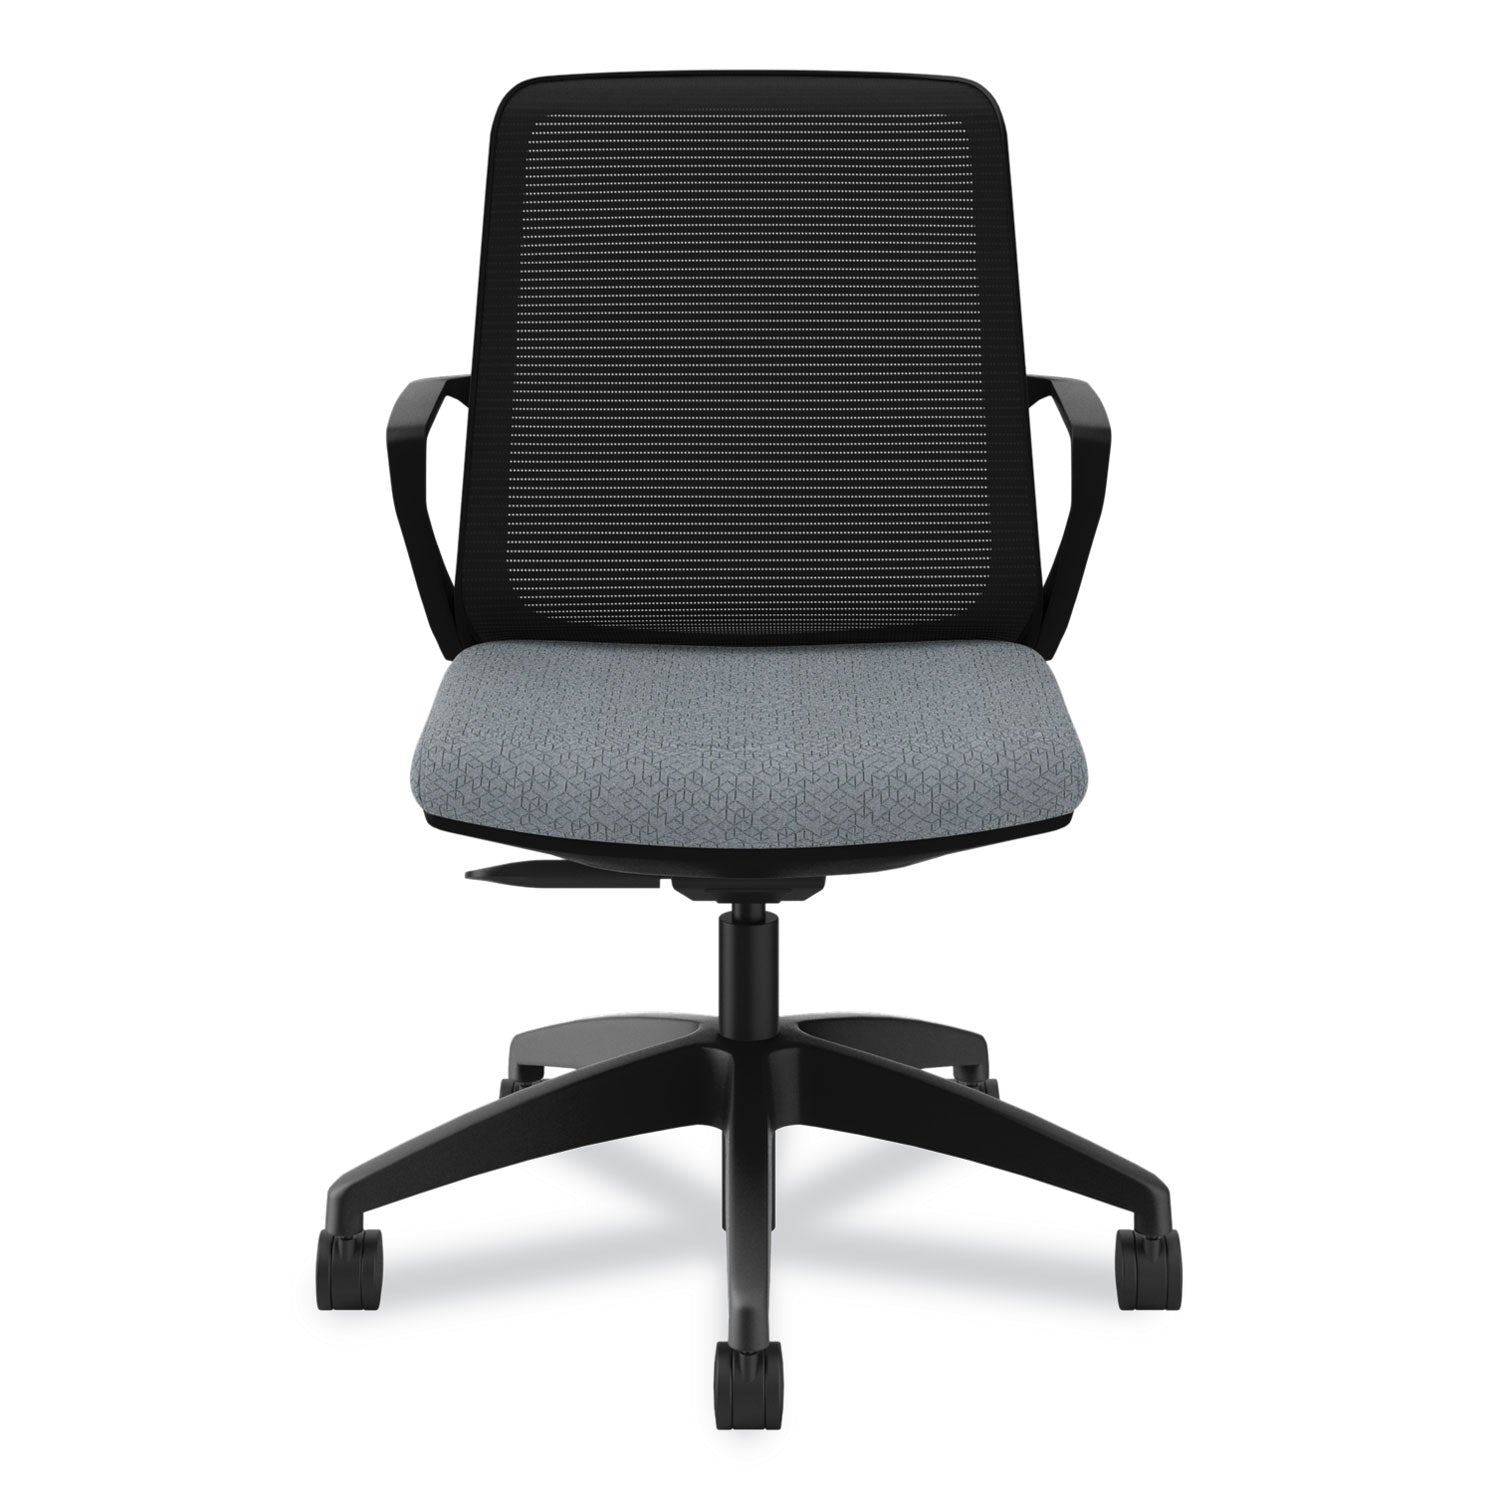 cliq-office-chair-supports-up-to-300-lb-17-to-22-seat-height-basalt-seat-black-back-base-ships-in-7-10-business-days_honclqimapx25t - 2